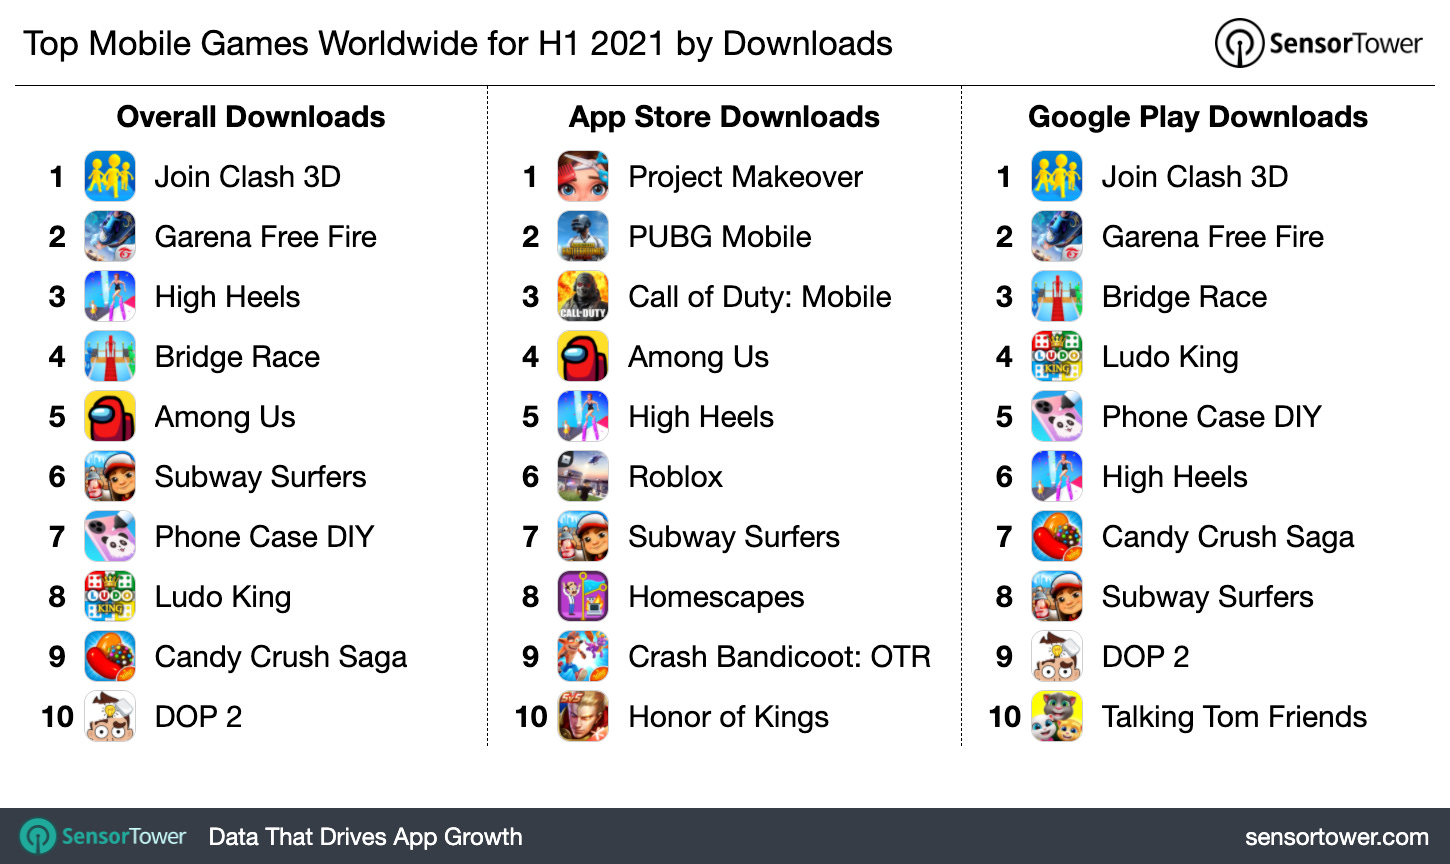 1H 2021 Most Downloaded Games Worldwide